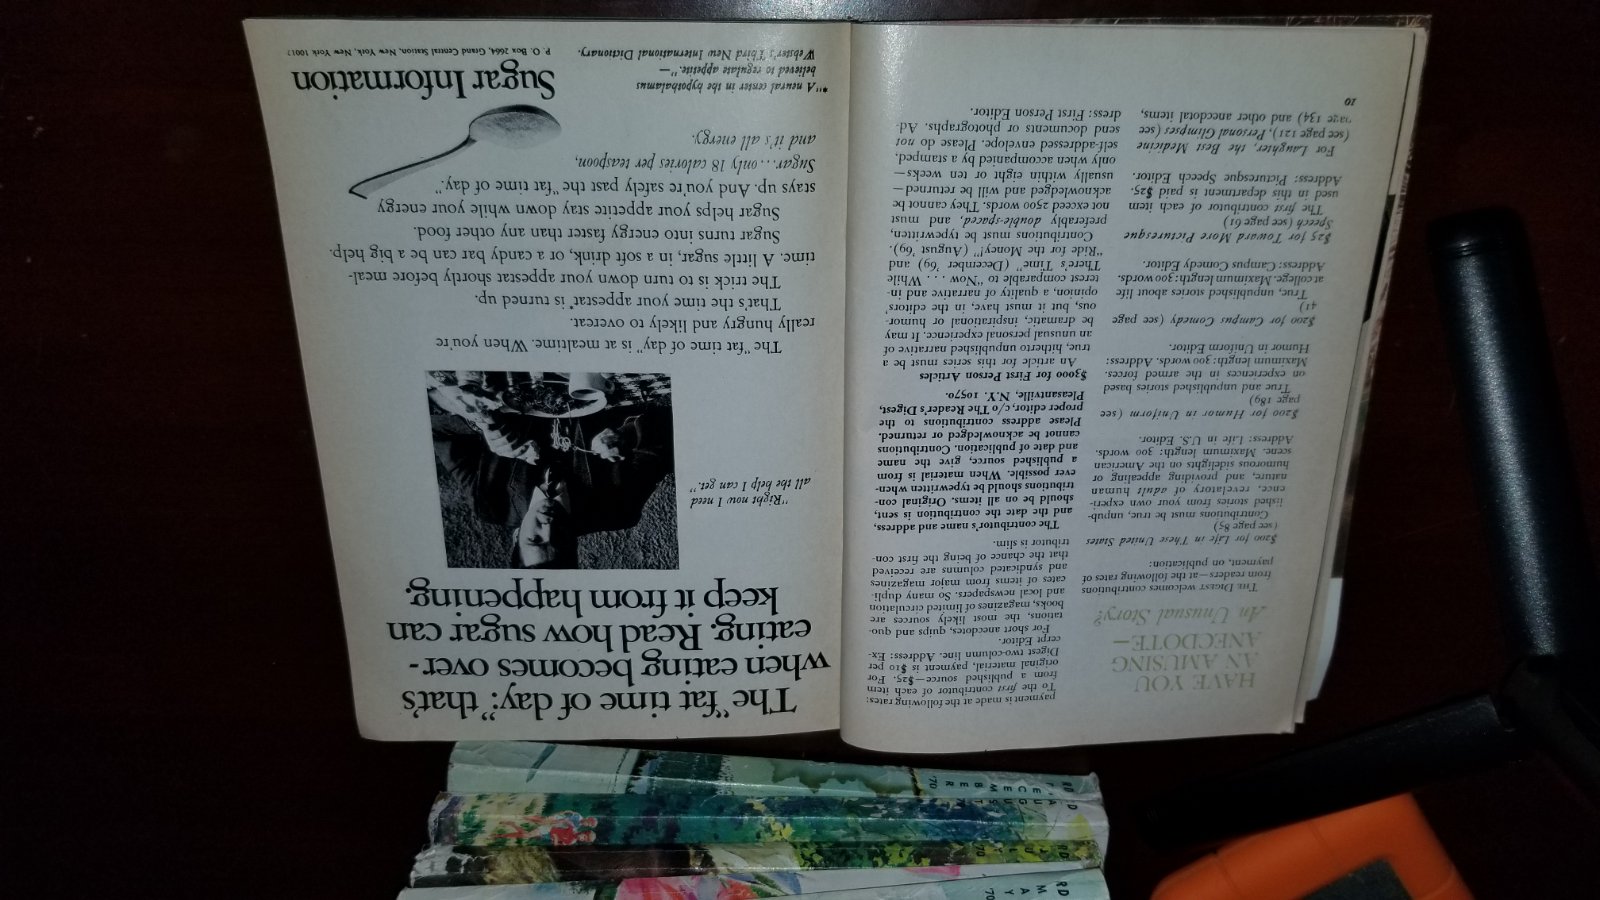 review-of-back-issues-of-readers-digest-magazine-jan-1970-eat-sugar-to-not-overeat-ep-2-luke-nandibear